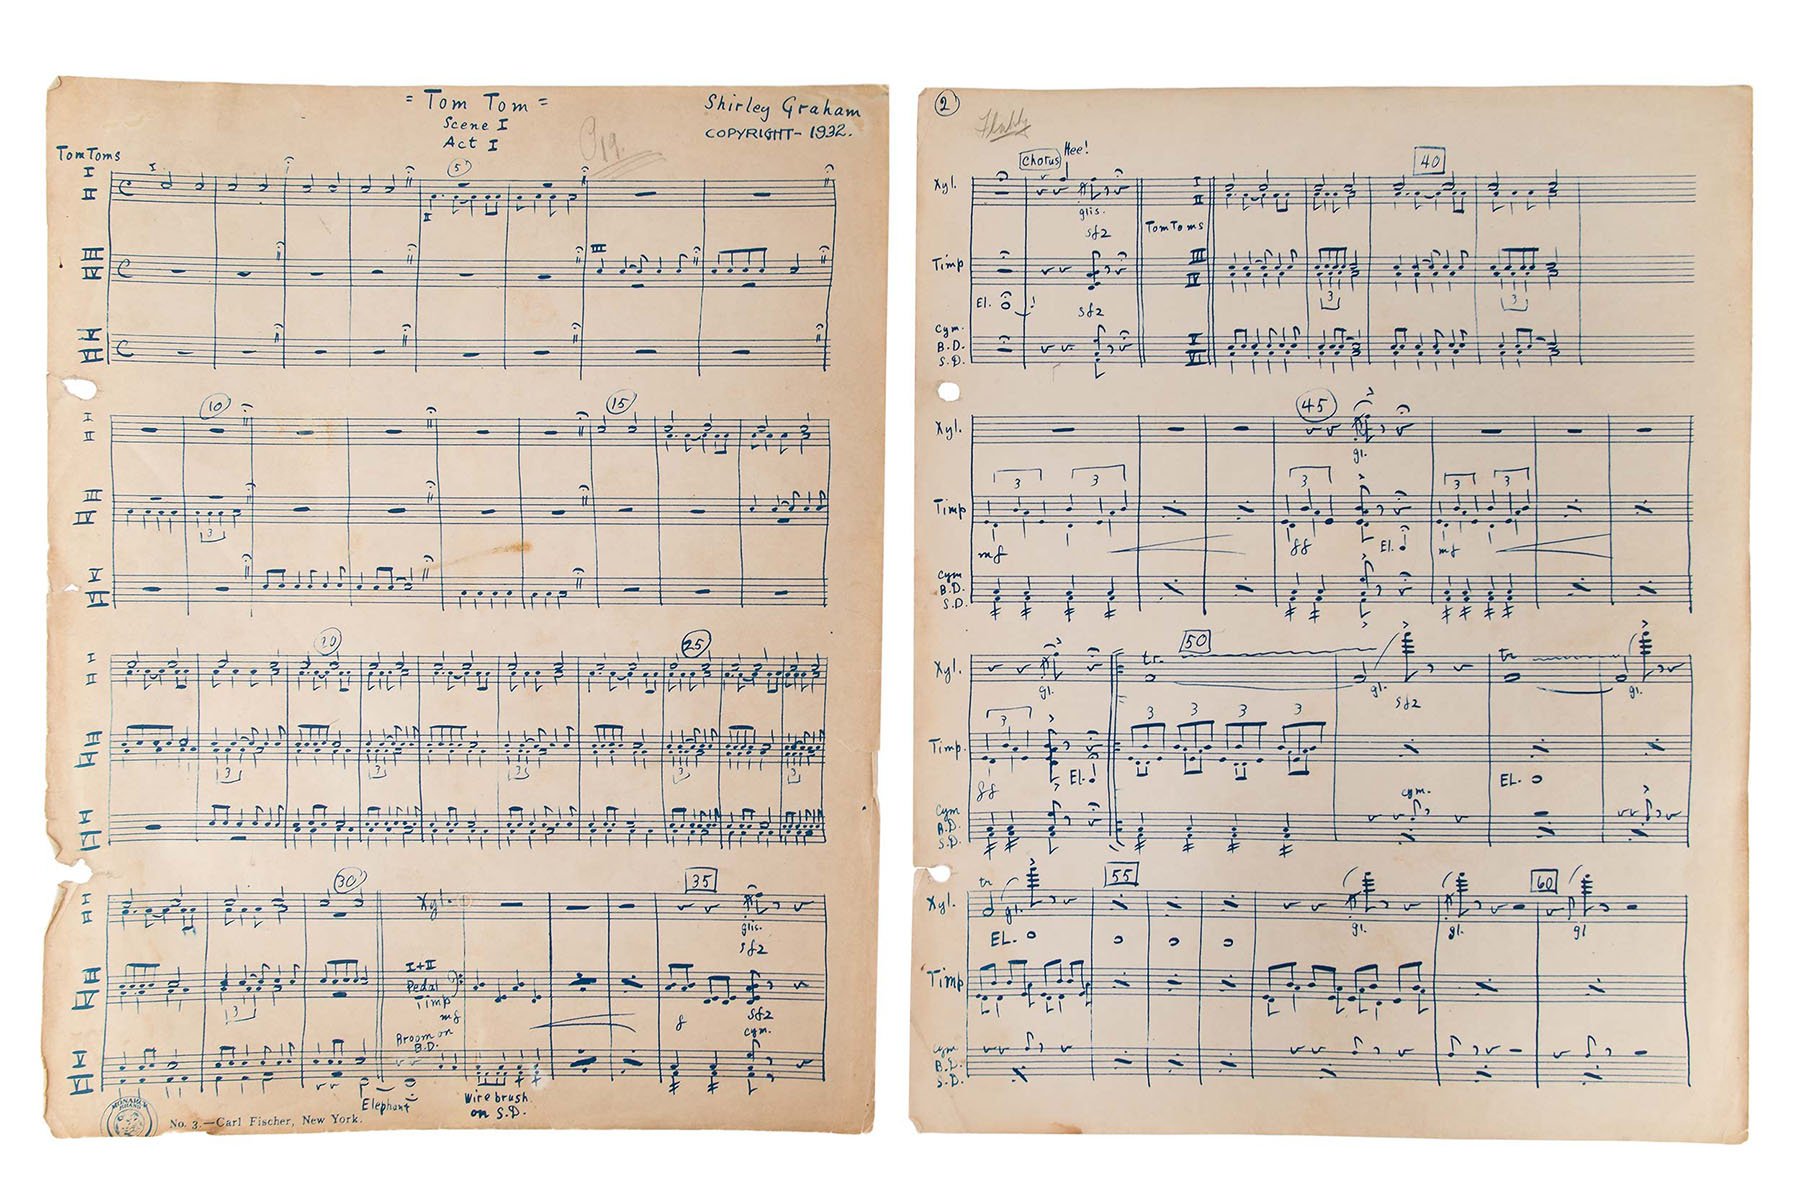 Sheet music from “Tom-Toms: An Epic of Music and The Negro” by Shirley Graham Du Bois